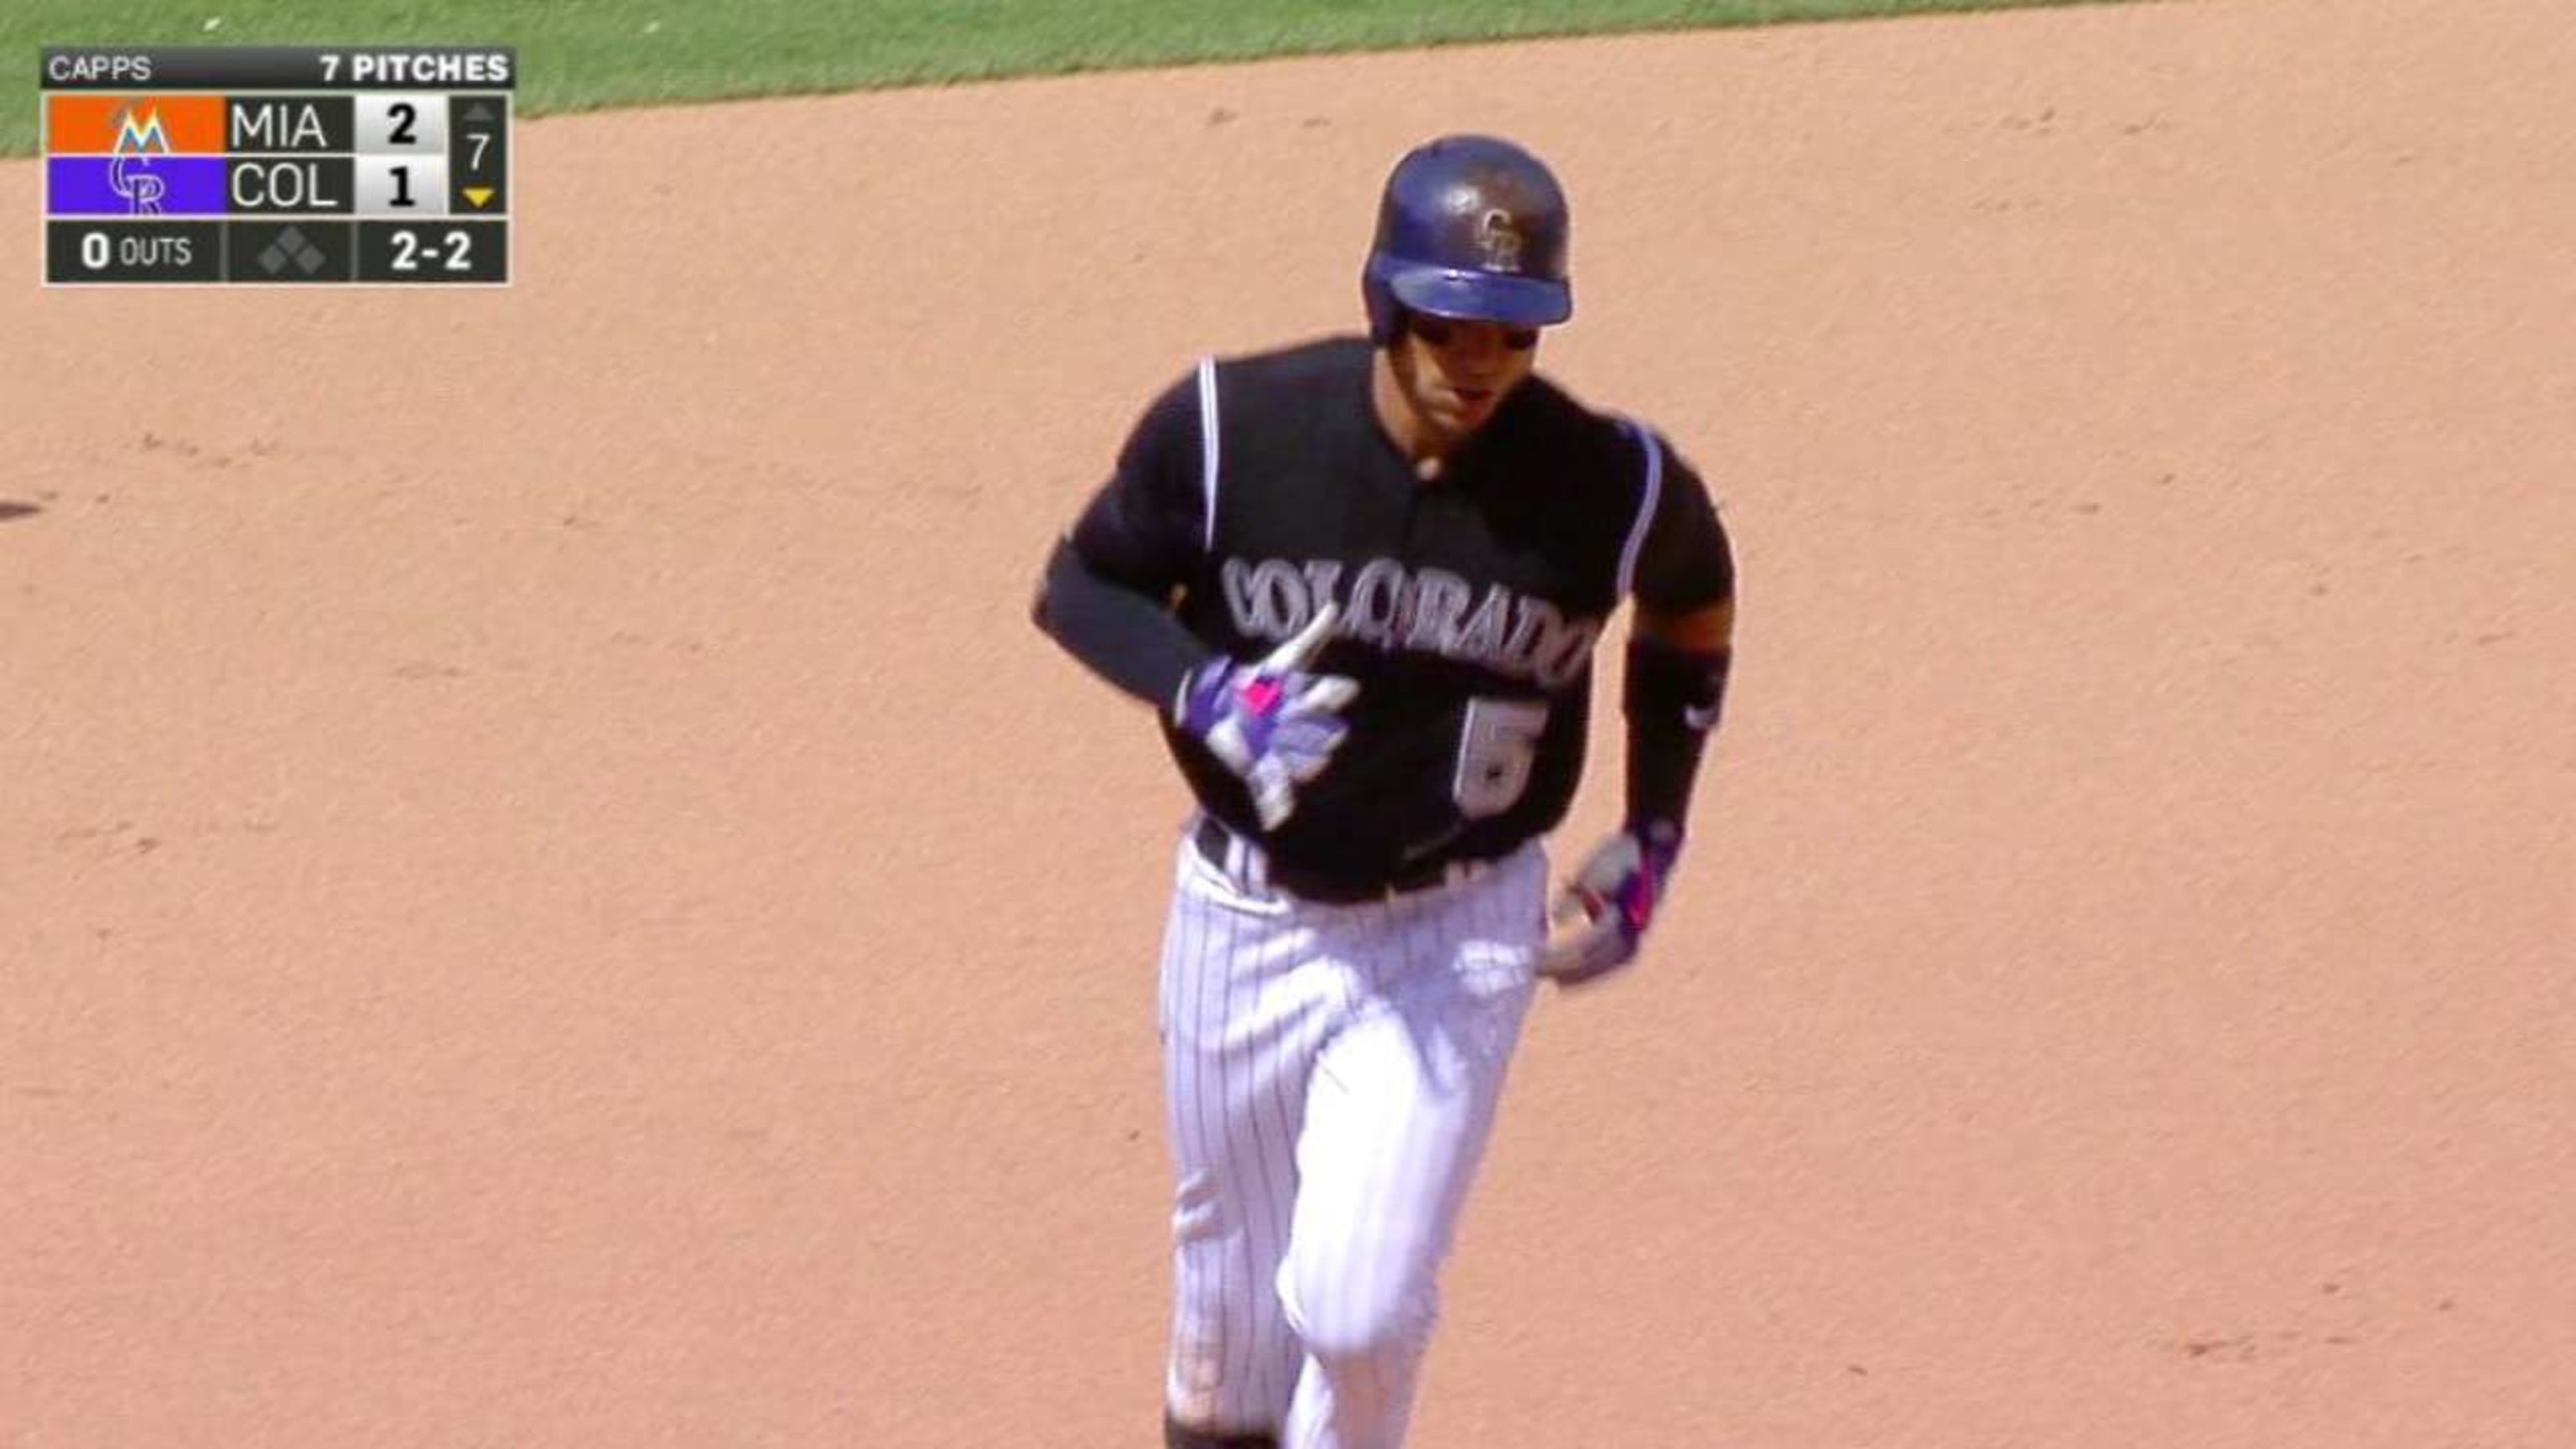 New Rockies outfielders settle in at vast Coors Field